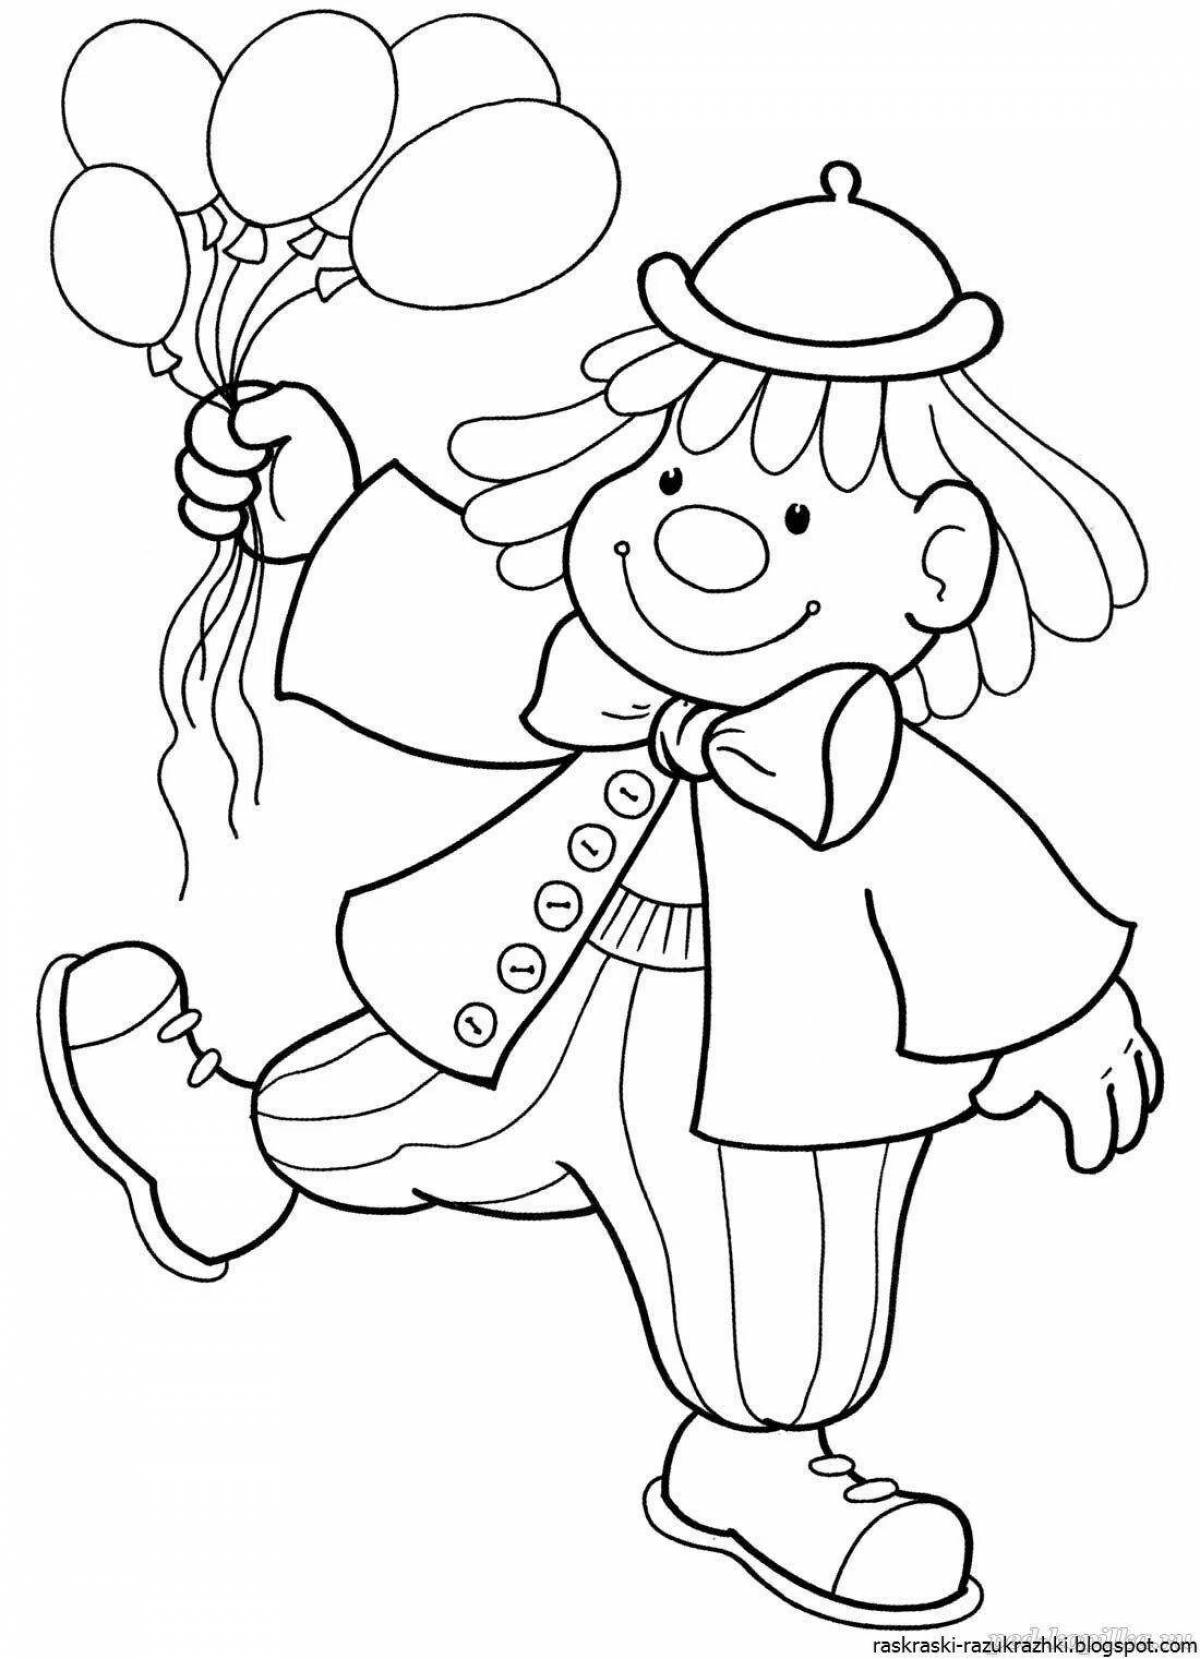 Colorful clown coloring pages for kids